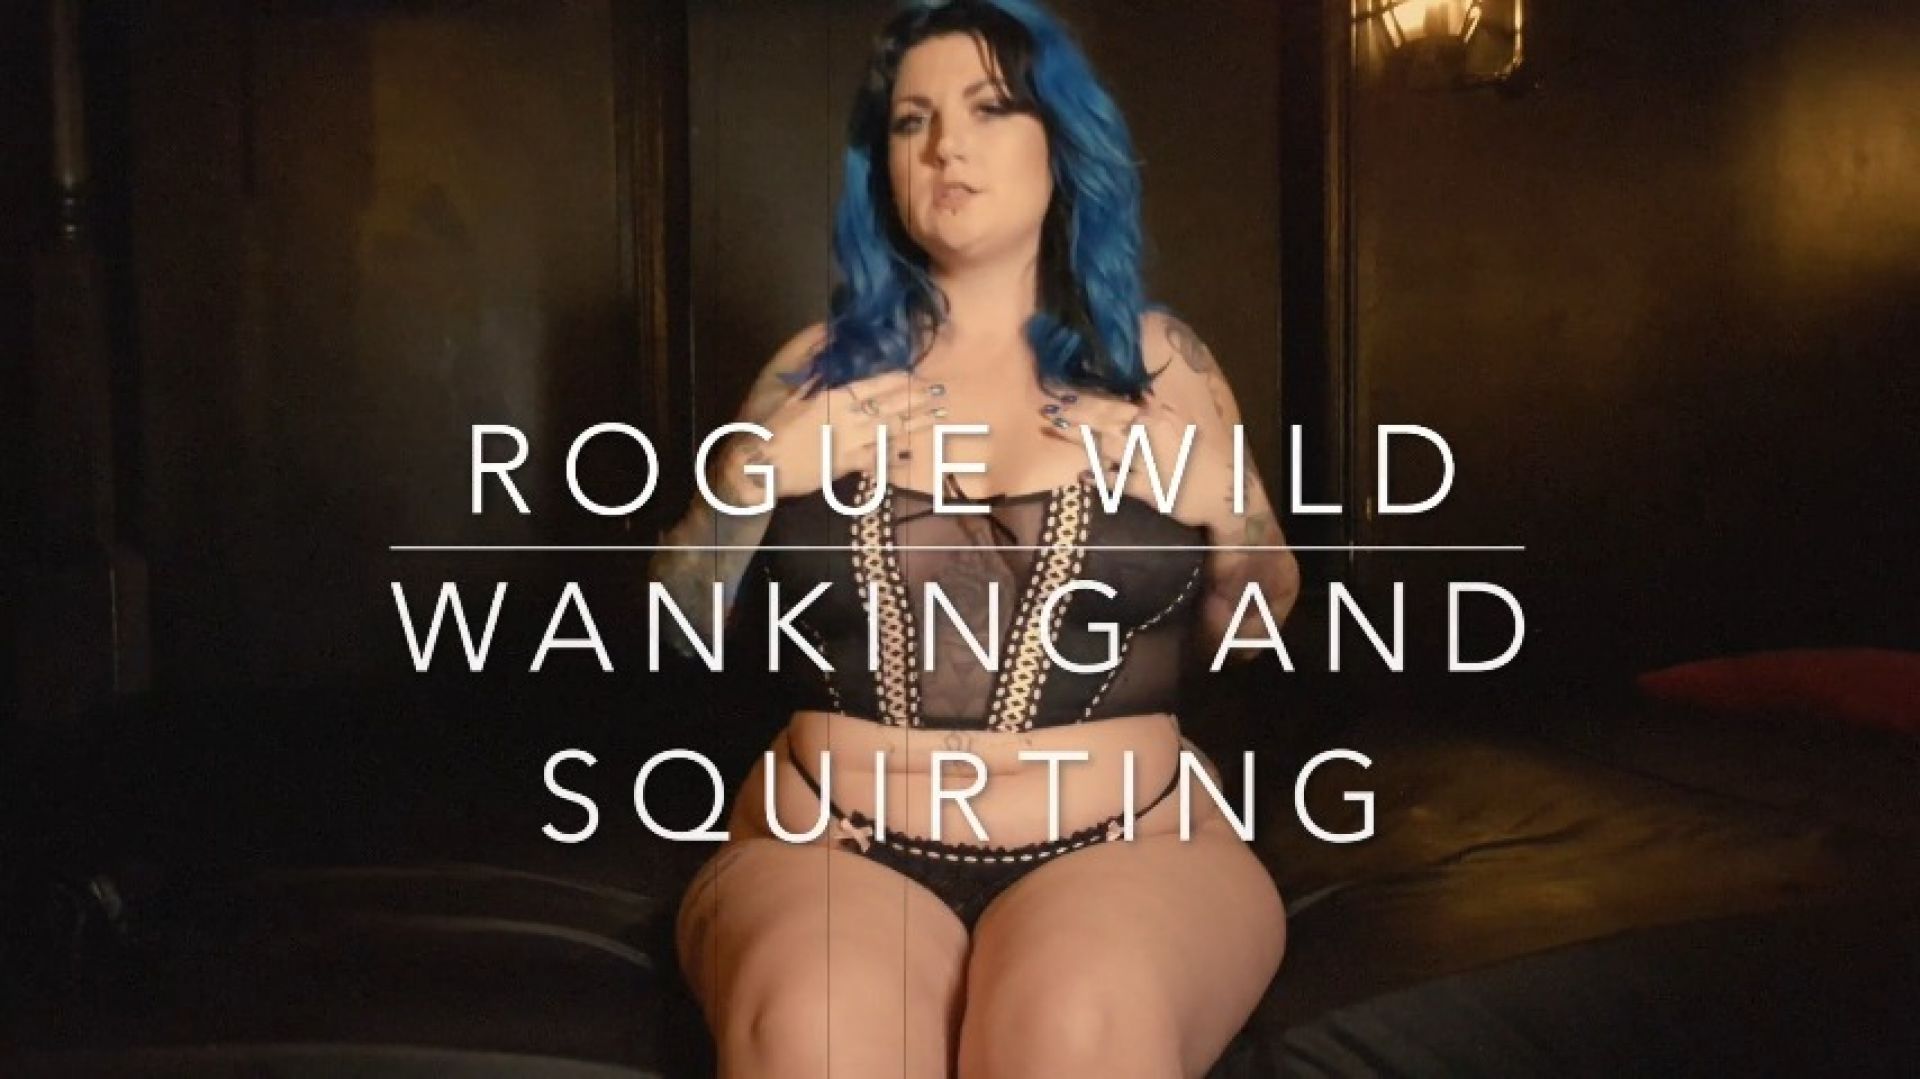 Rogue Wild - Wanking and squirting